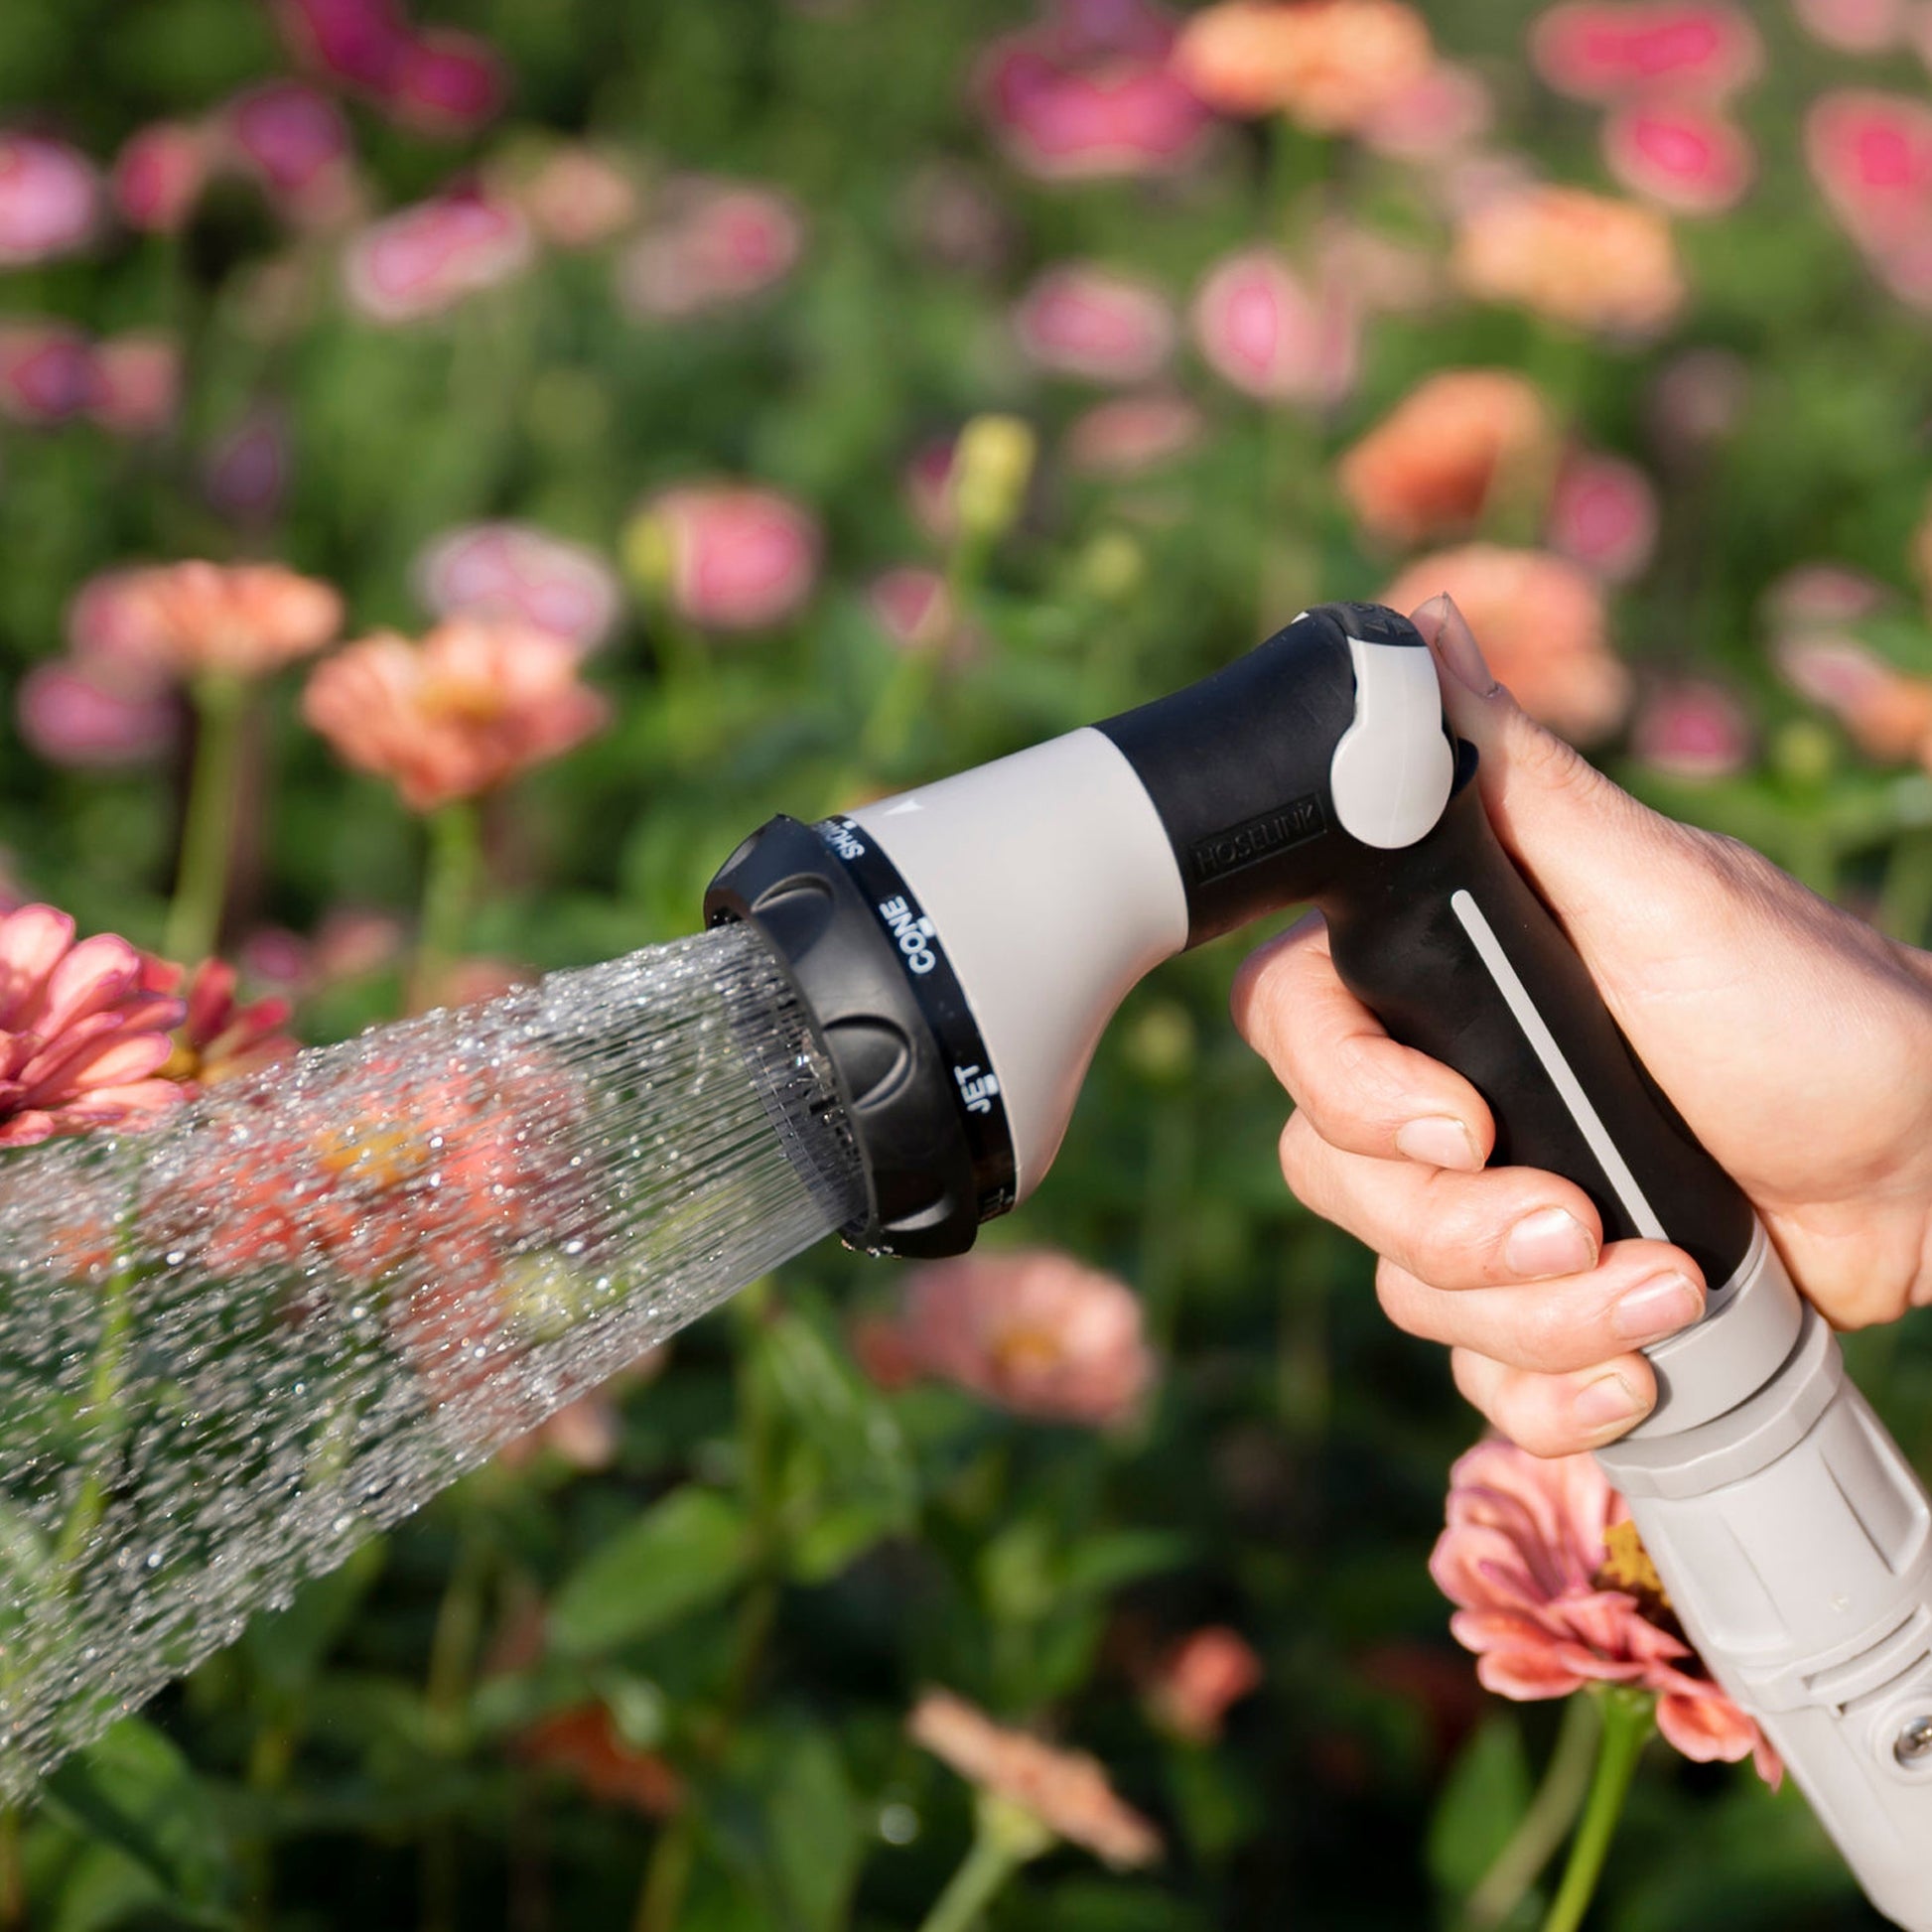 spray gun being held while watering the garden with pink flowers in the background